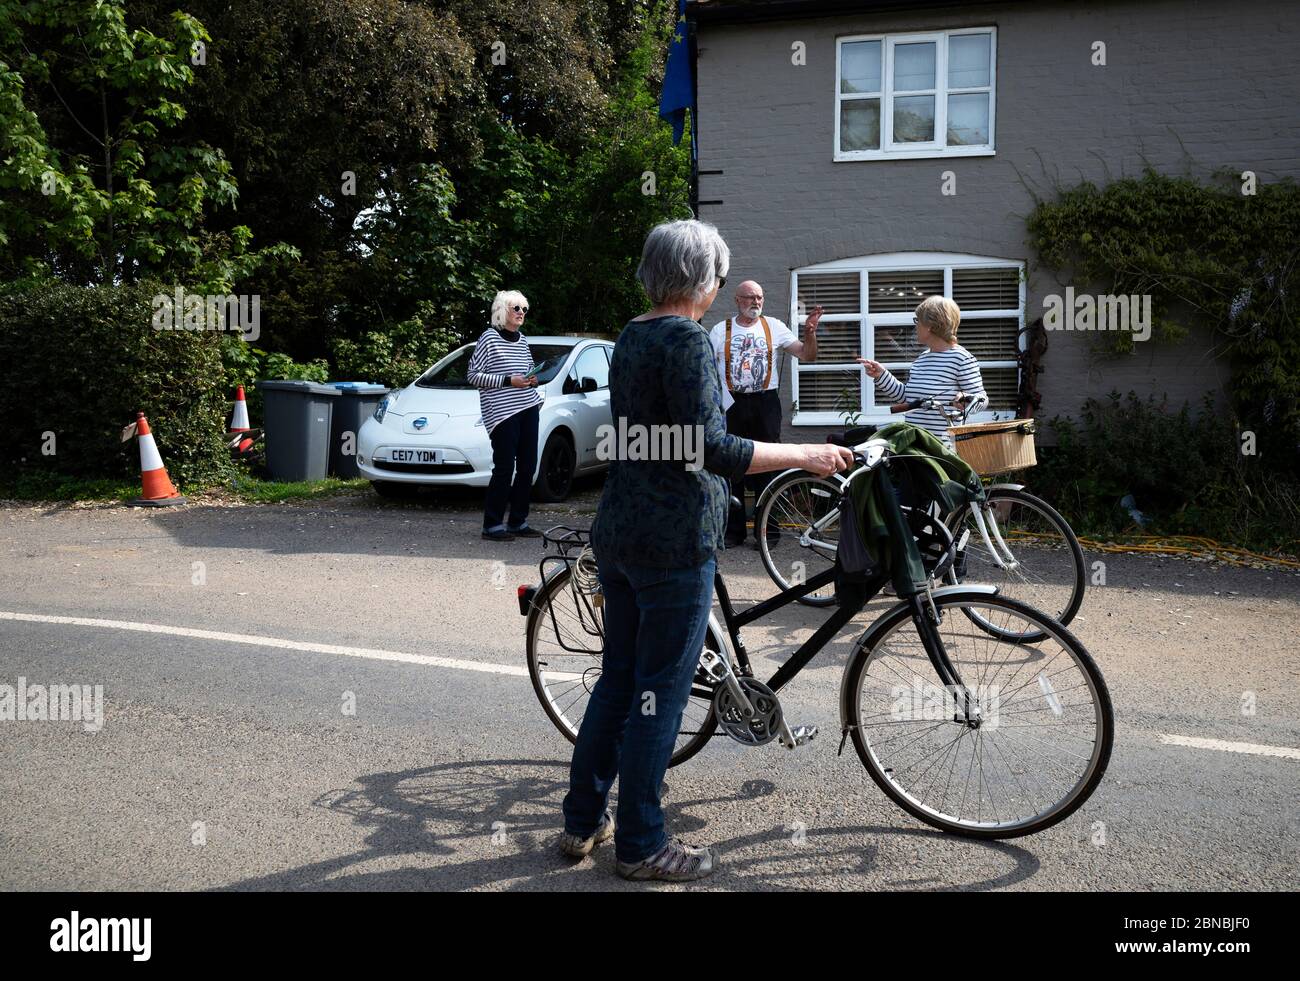 Social distancing cyclists Stock Photo